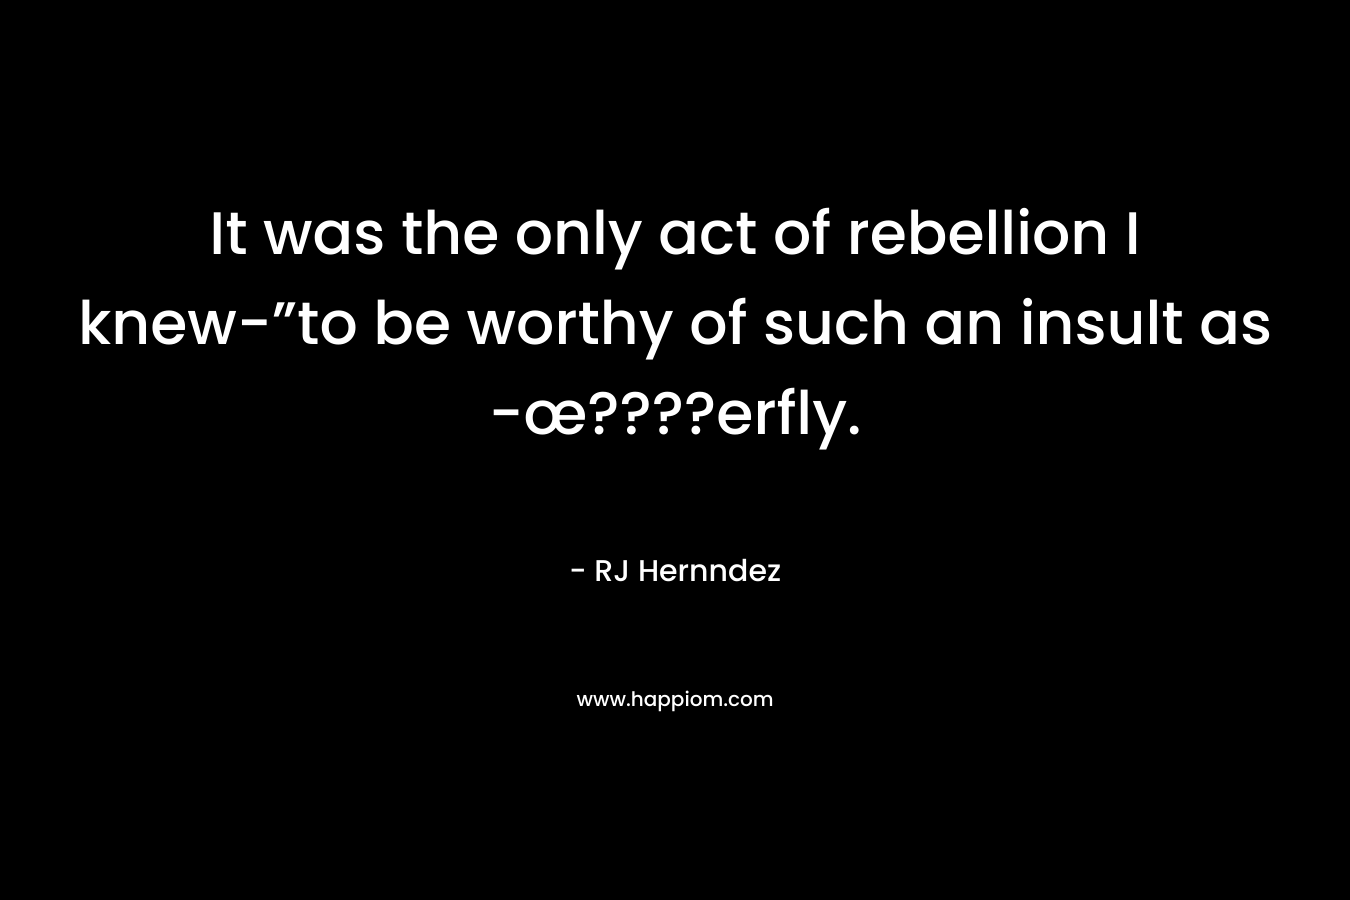 It was the only act of rebellion I knew-”to be worthy of such an insult as -œ????erfly.